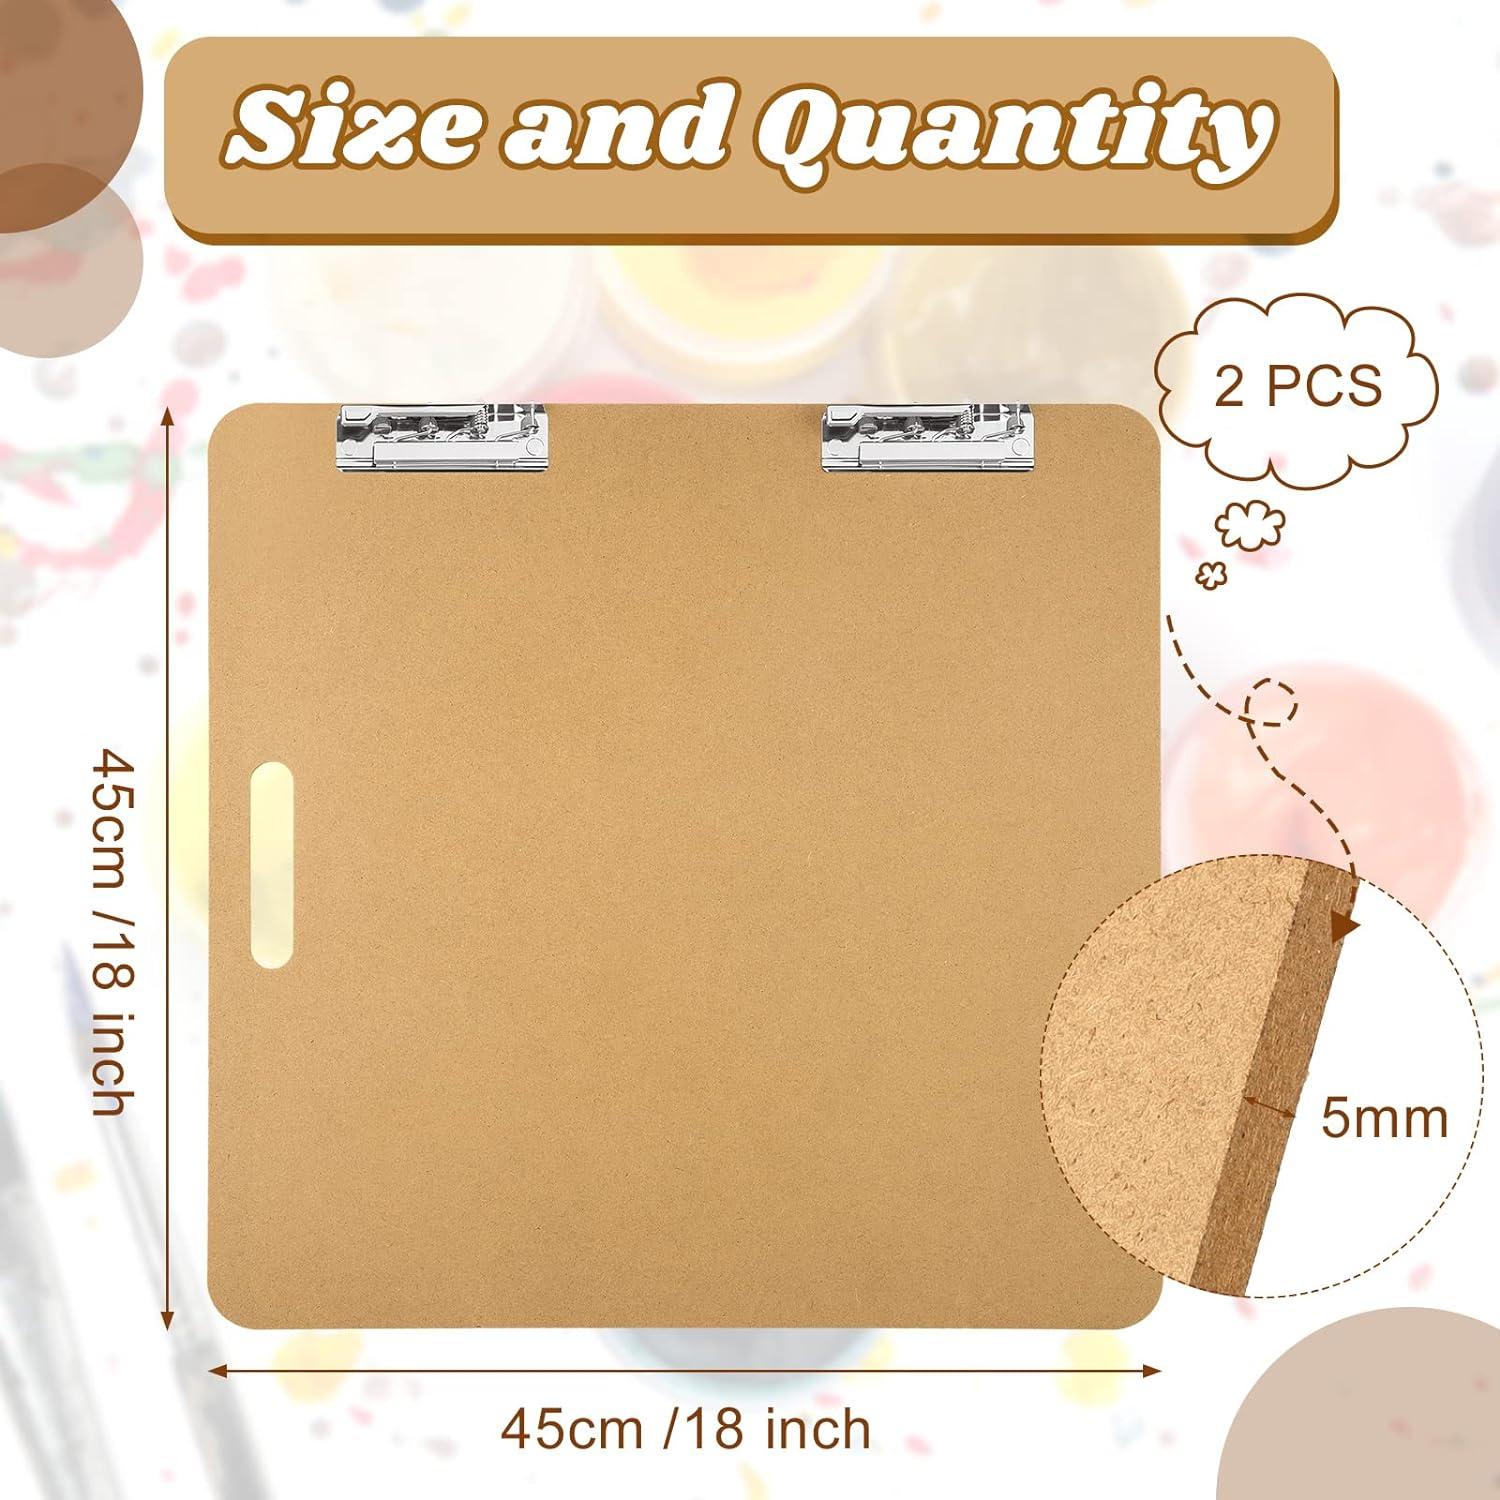 2 Pack 18 x 18 Inch Artist Sketch Tote Board MDF Drawing Board with Clips  and Handle Art Boards Supplies for Drawing Painting Classroom Studio or  Field Use